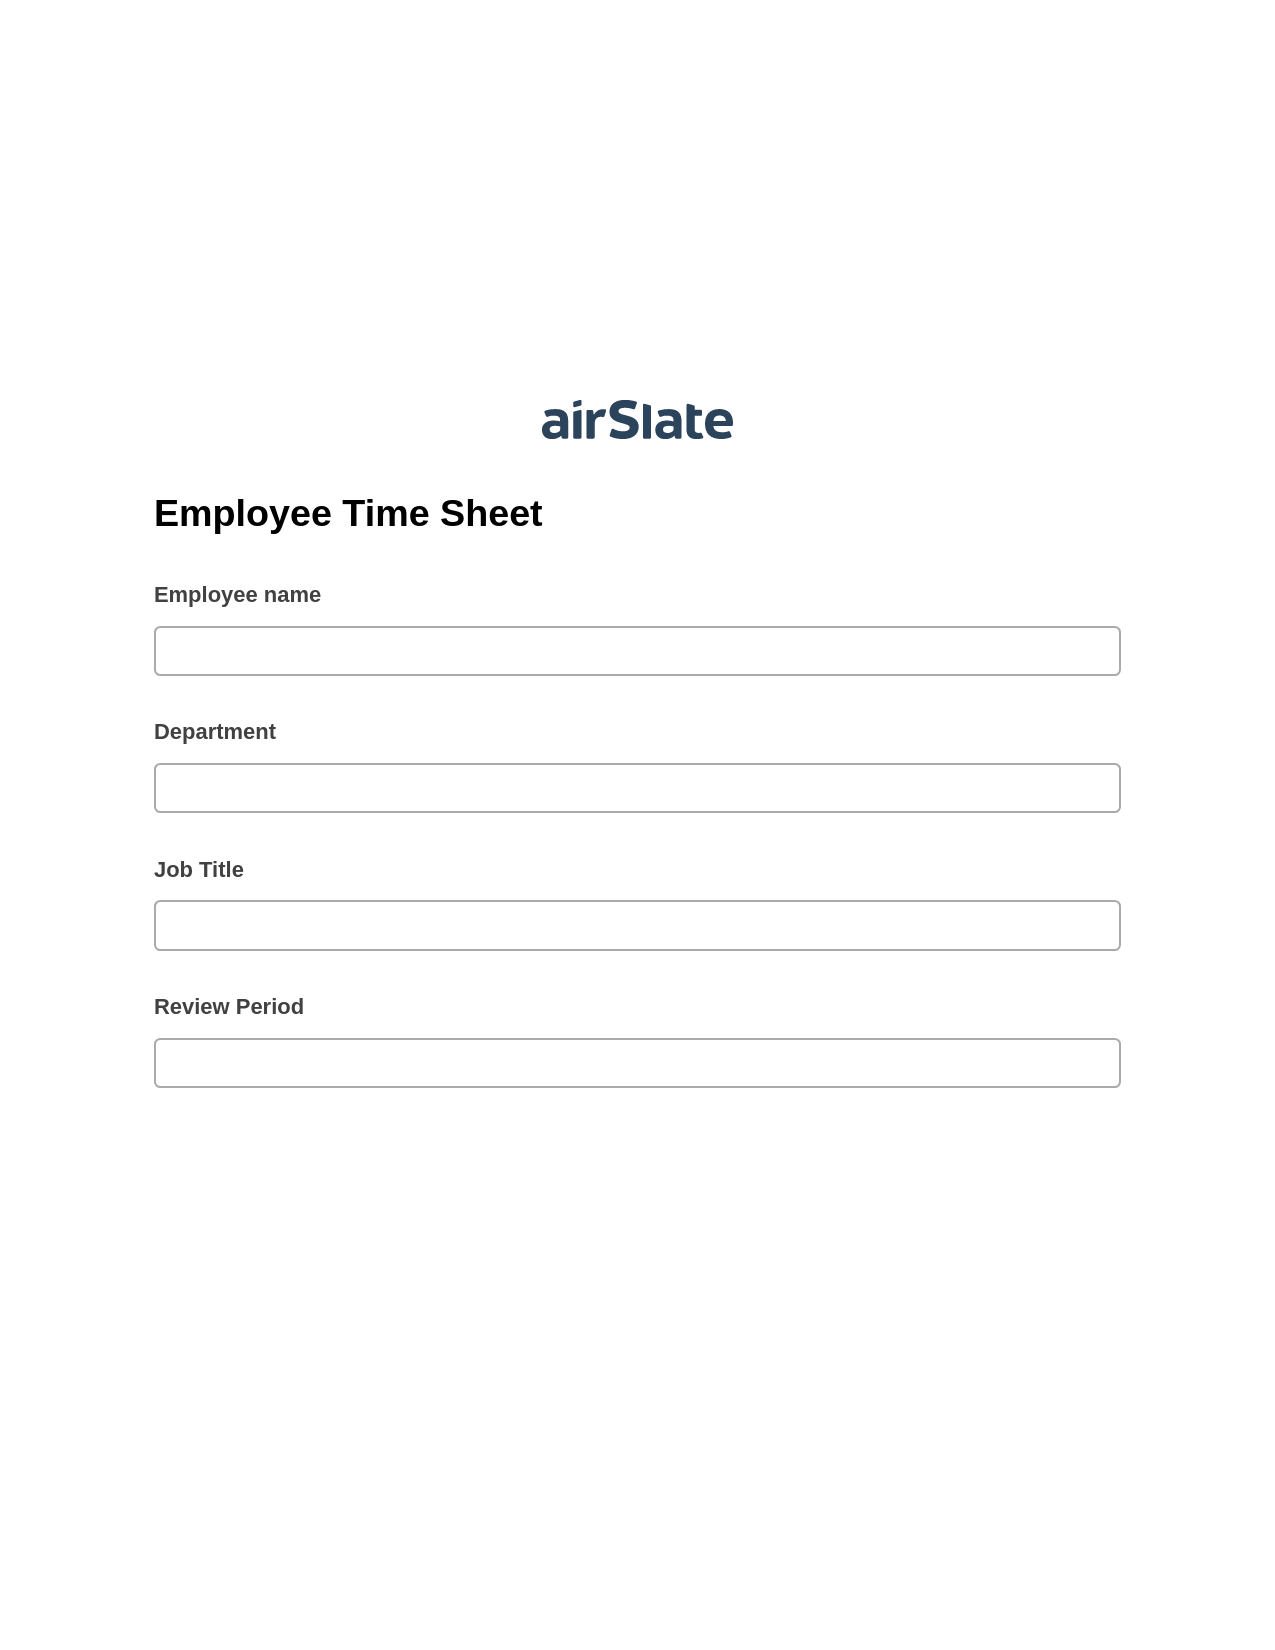 Employee Time Sheet Pre-fill from Excel Spreadsheet Bot, Create slate addon, Archive to SharePoint Folder Bot